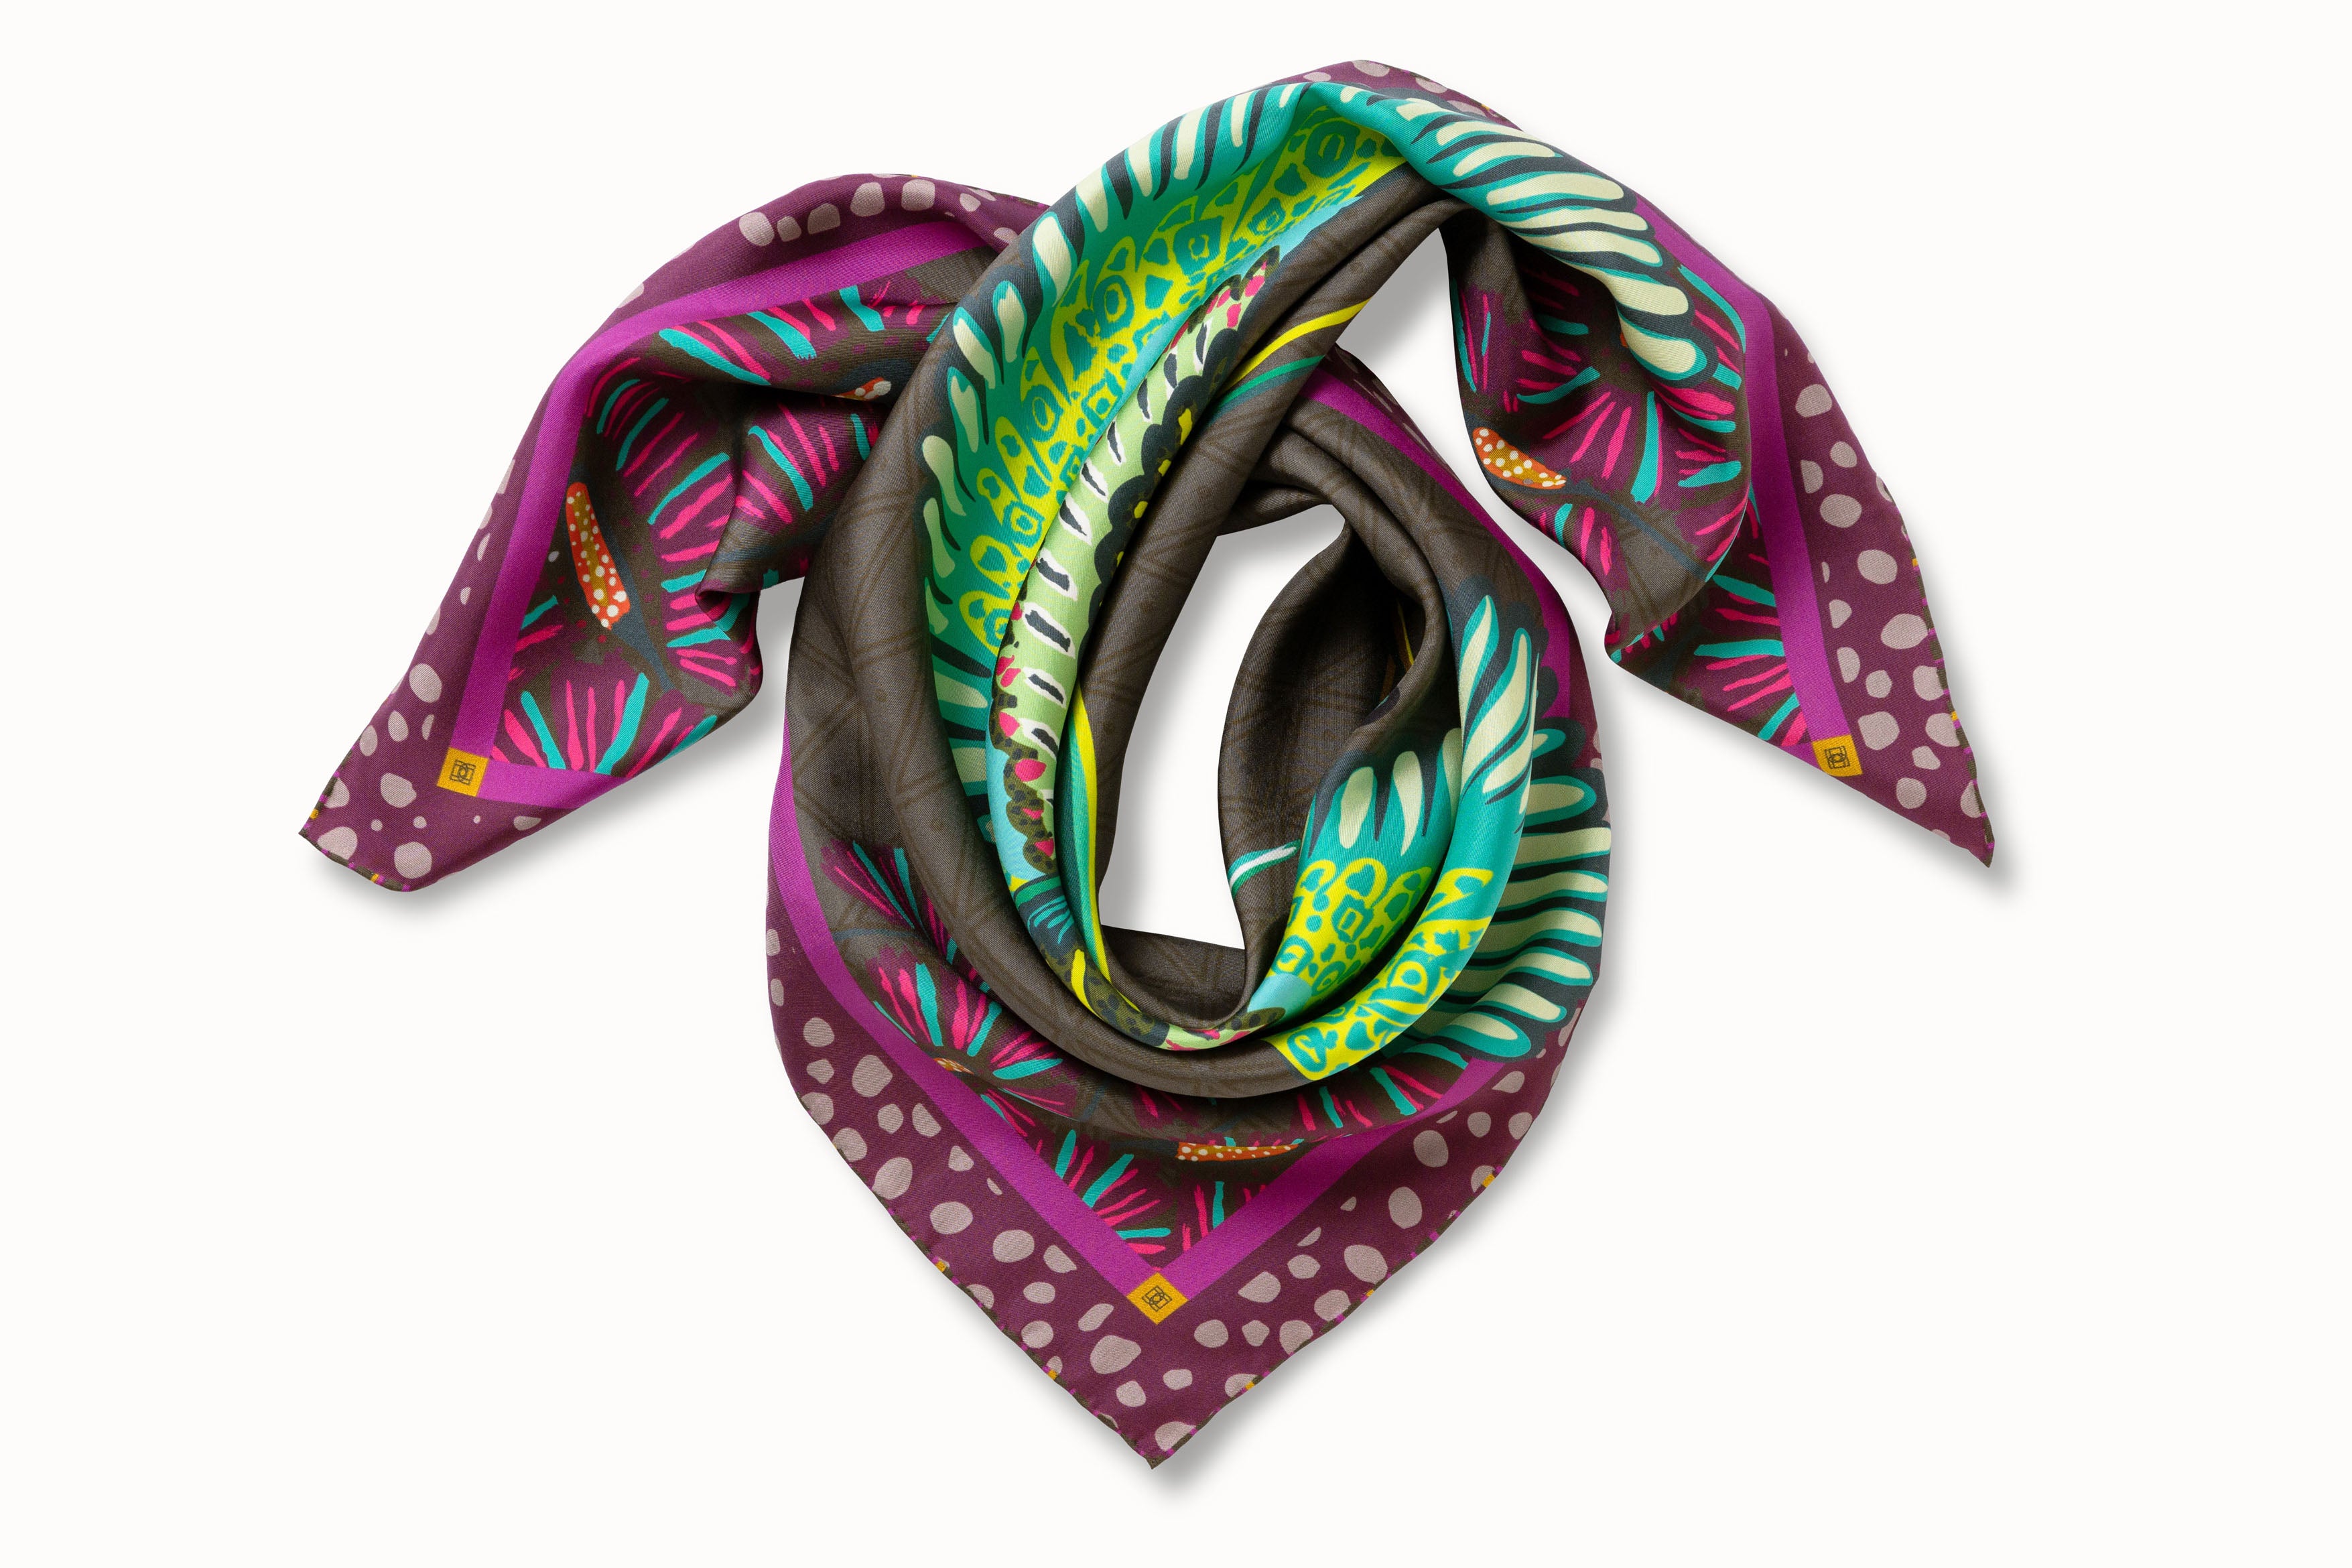 Rolled image of 100% silk square scarf featuring a motif of two large-scale cranes with brightly colored wings in shades of blue and green with geometric designs. The scarf’s center background is a tonal army green and the border features irregular grey polka dots on a magenta background.